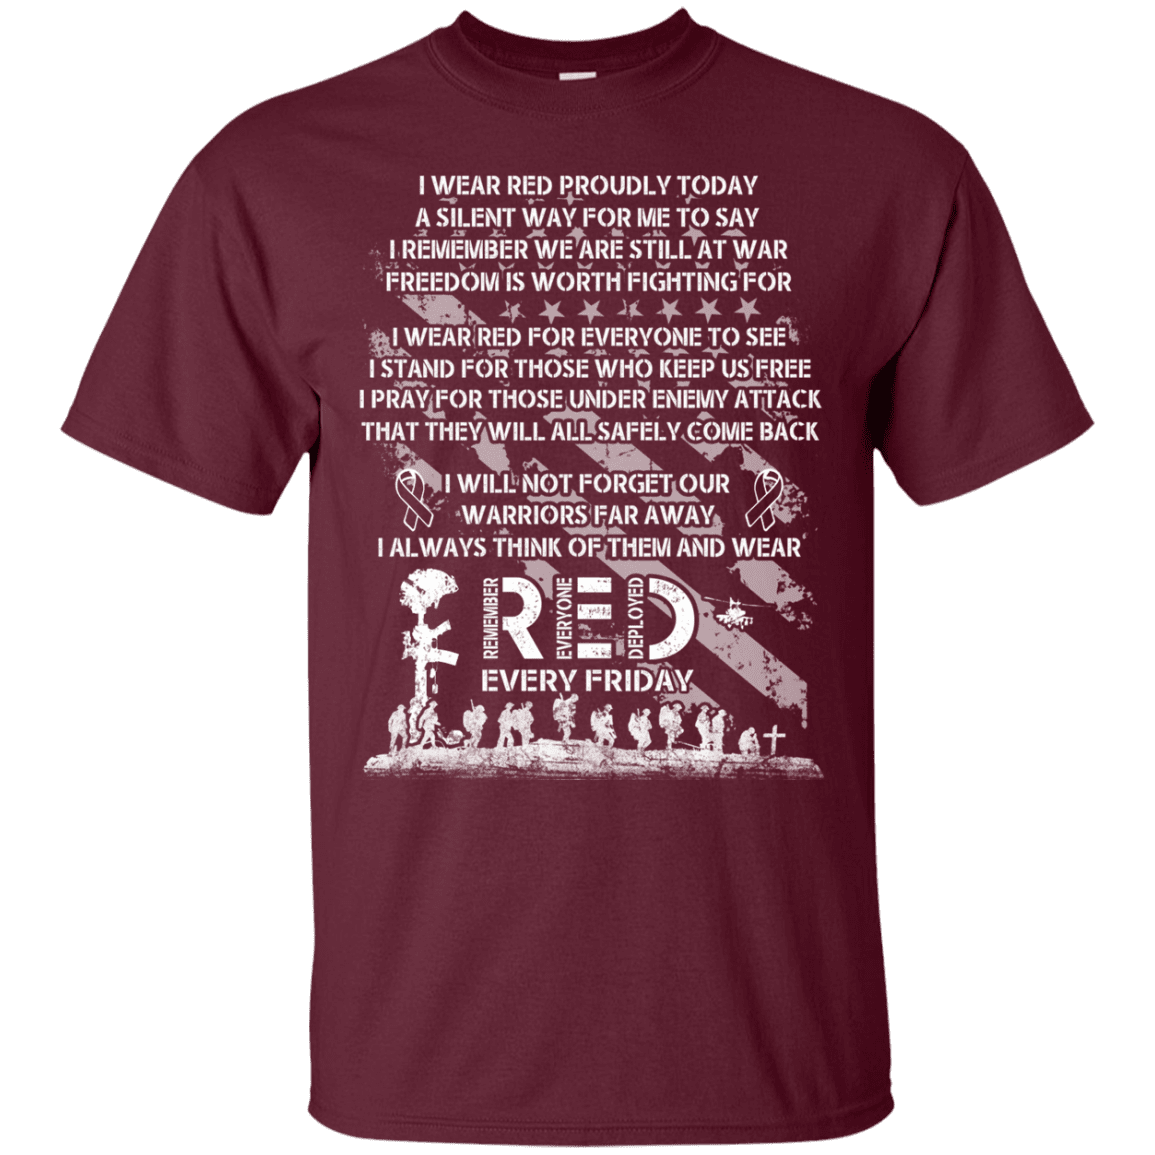 Military T-Shirt "WEAR RED EVERY DAY VETERAN REMEMBER MEMORY DAY"-TShirt-General-Veterans Nation